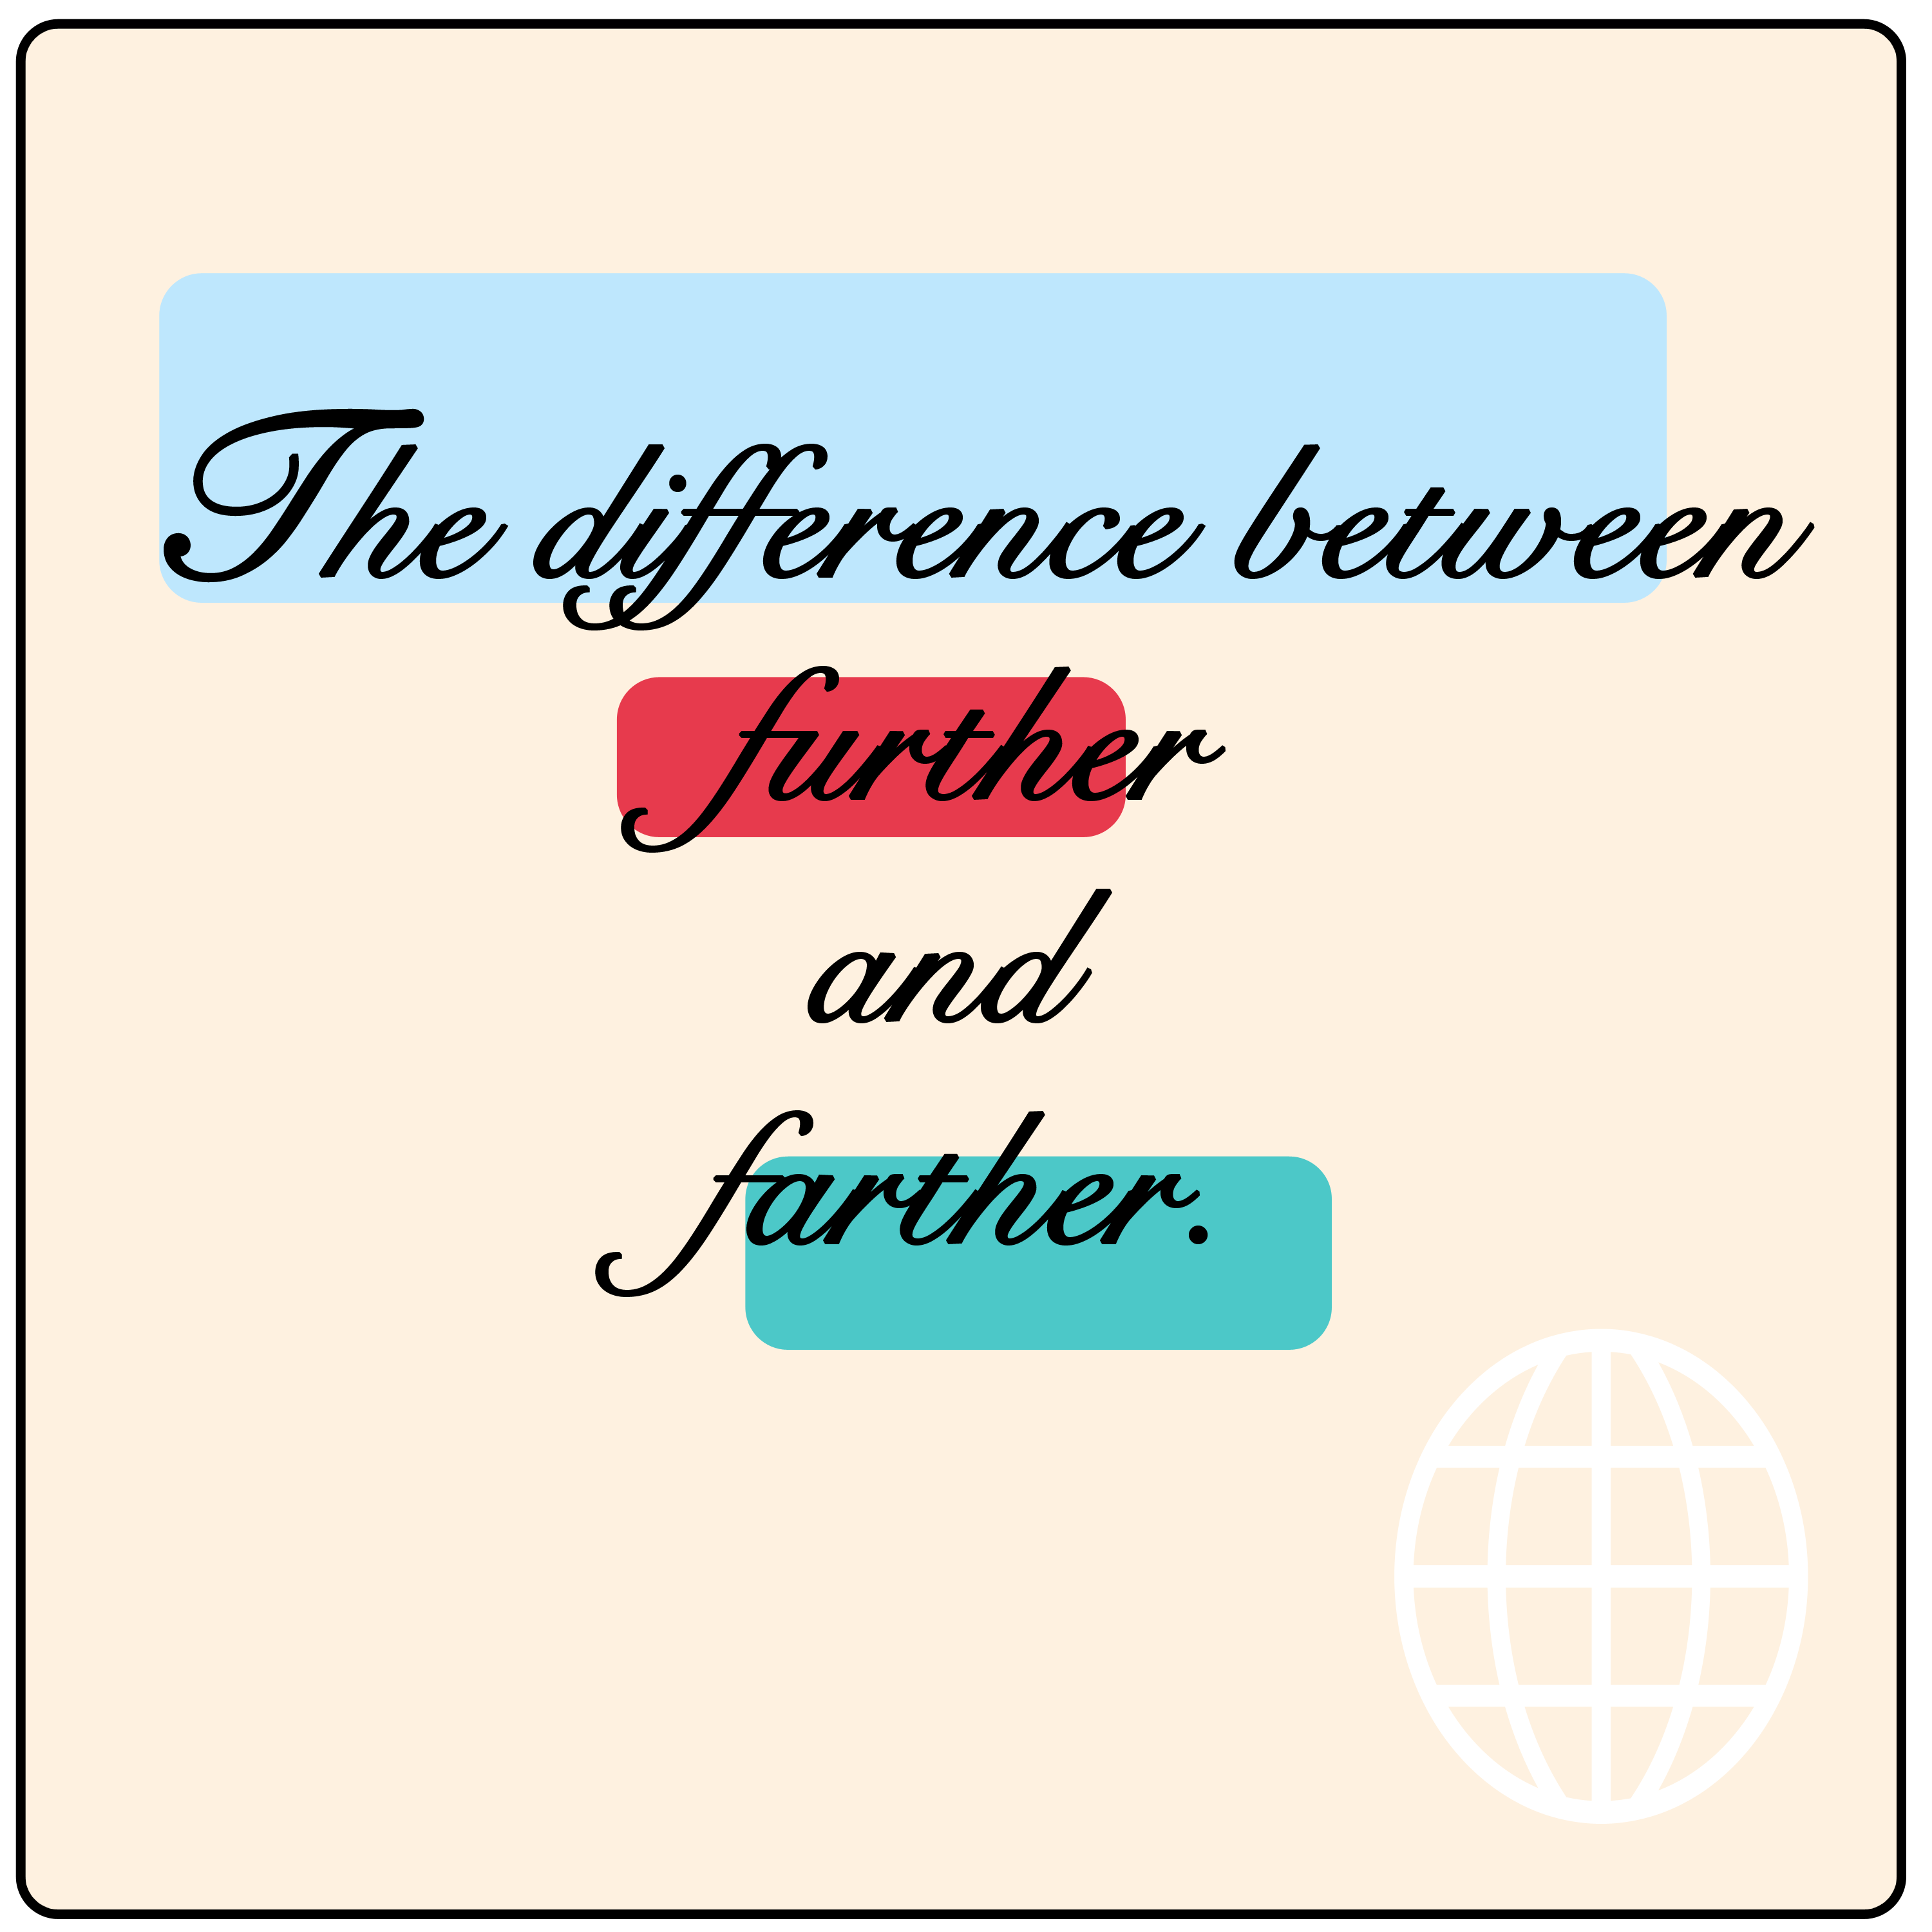 The difference between further and farther